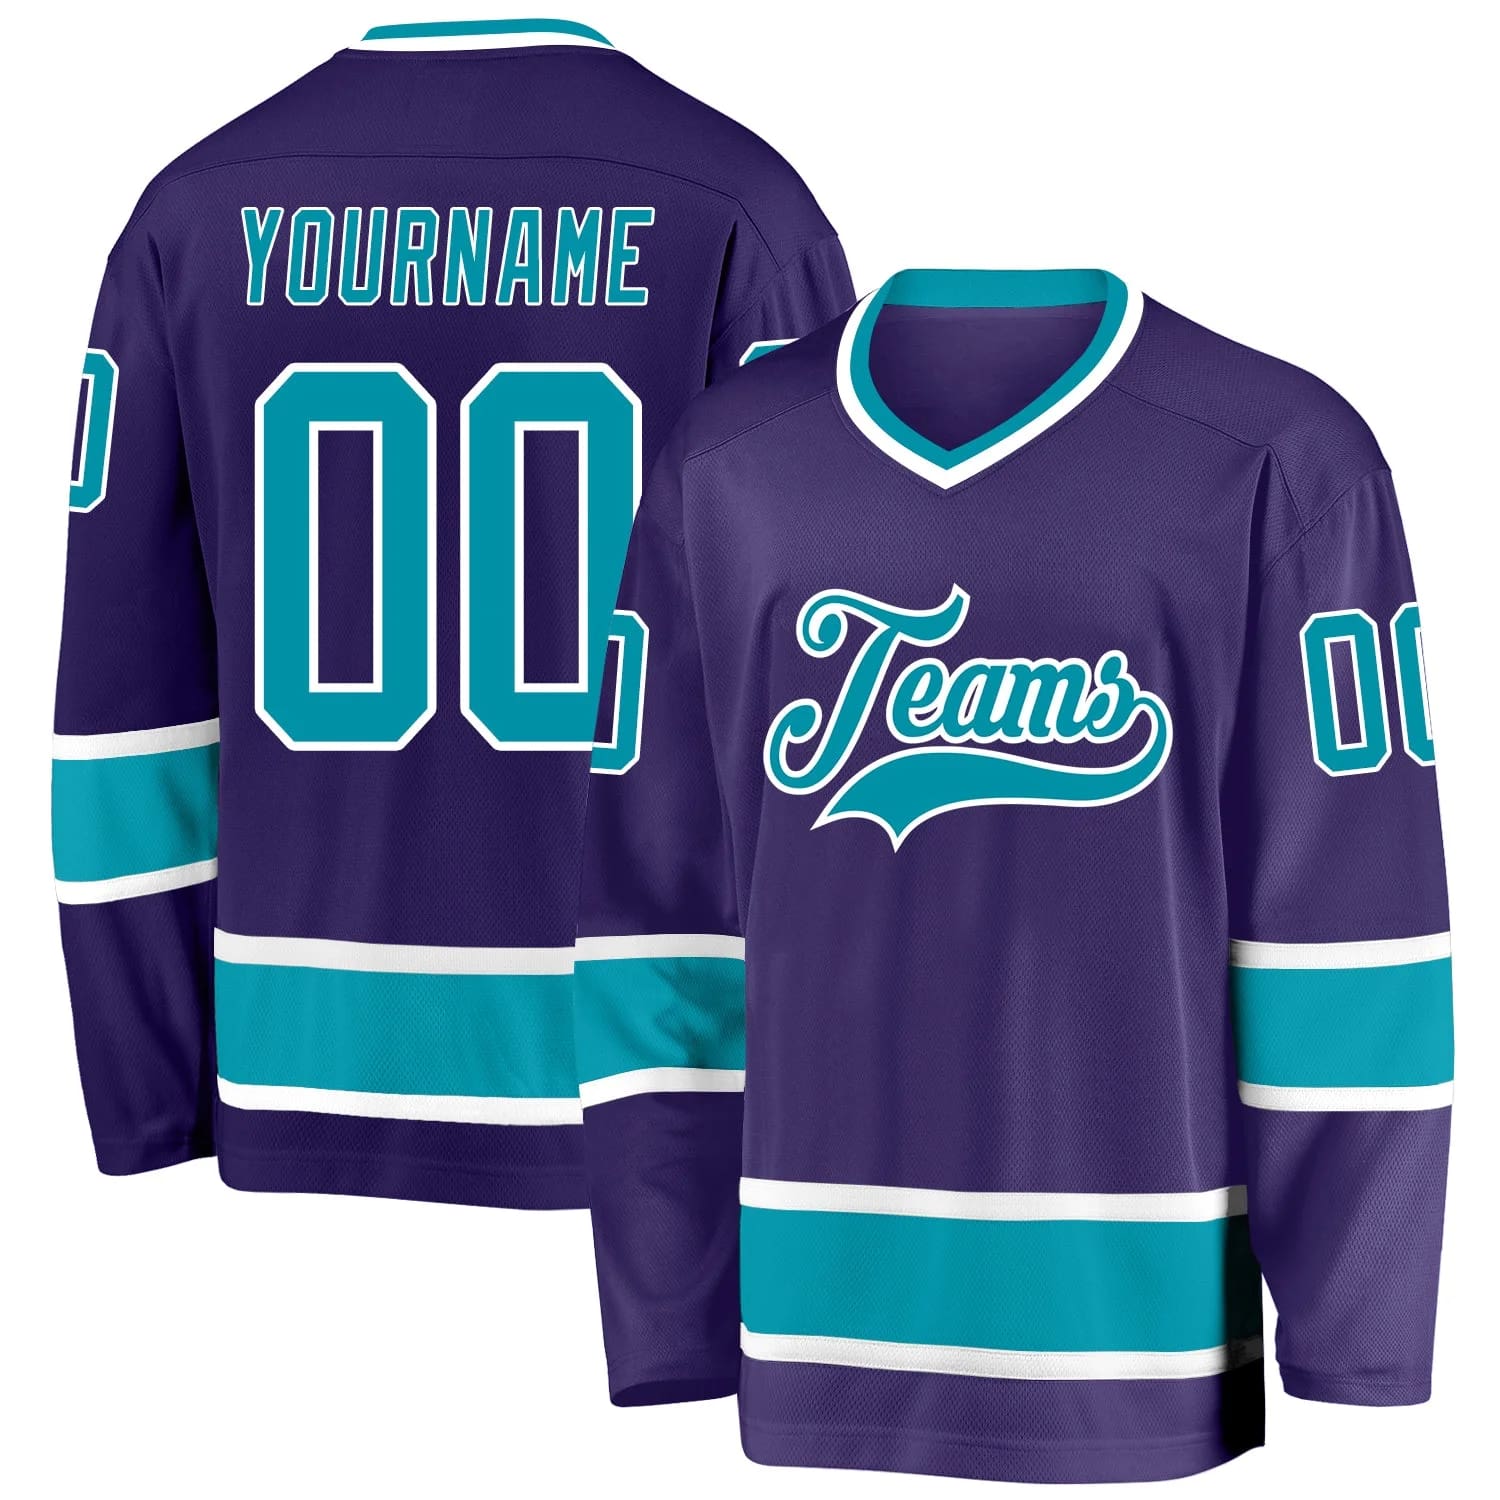 Stitched And Print Purple Teal-white Hockey Jersey Custom